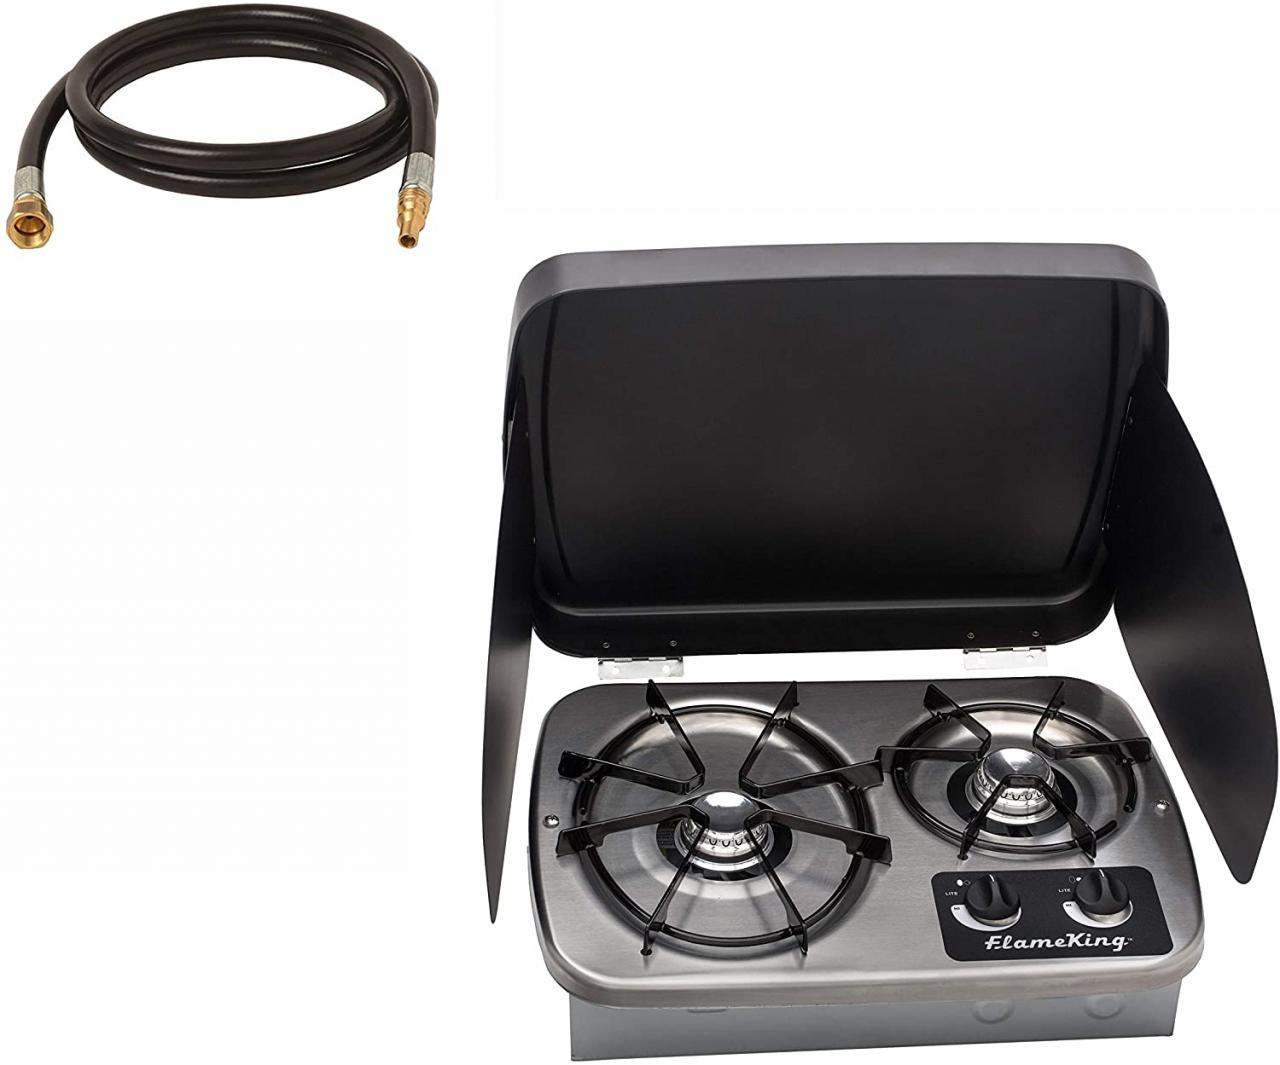 2 Burner Built-In RV Stove with wind shield, CSA approved Model #: YSNHT600  - Flame King